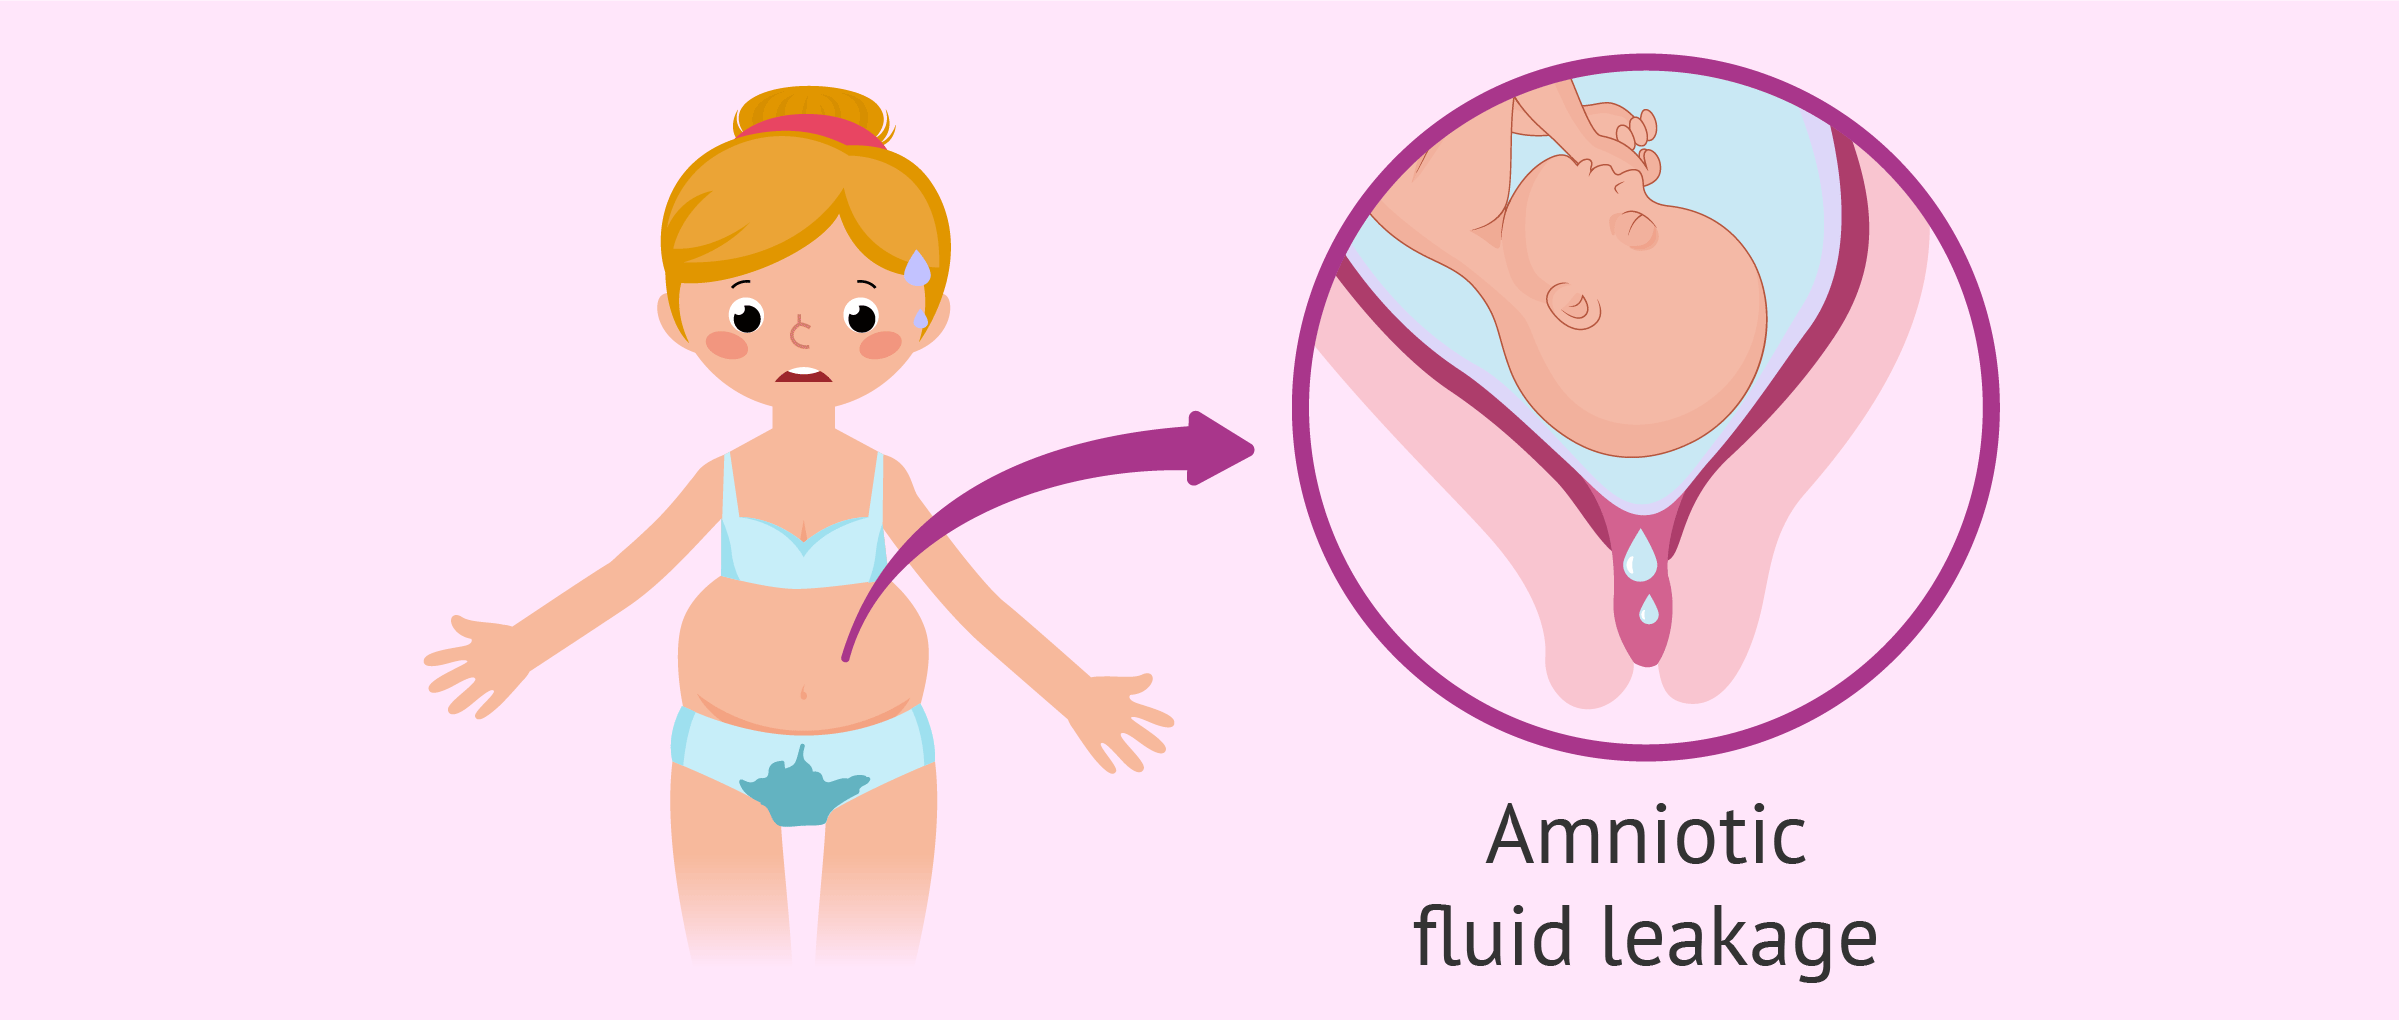 Amniotic fluid leakage: how to tell